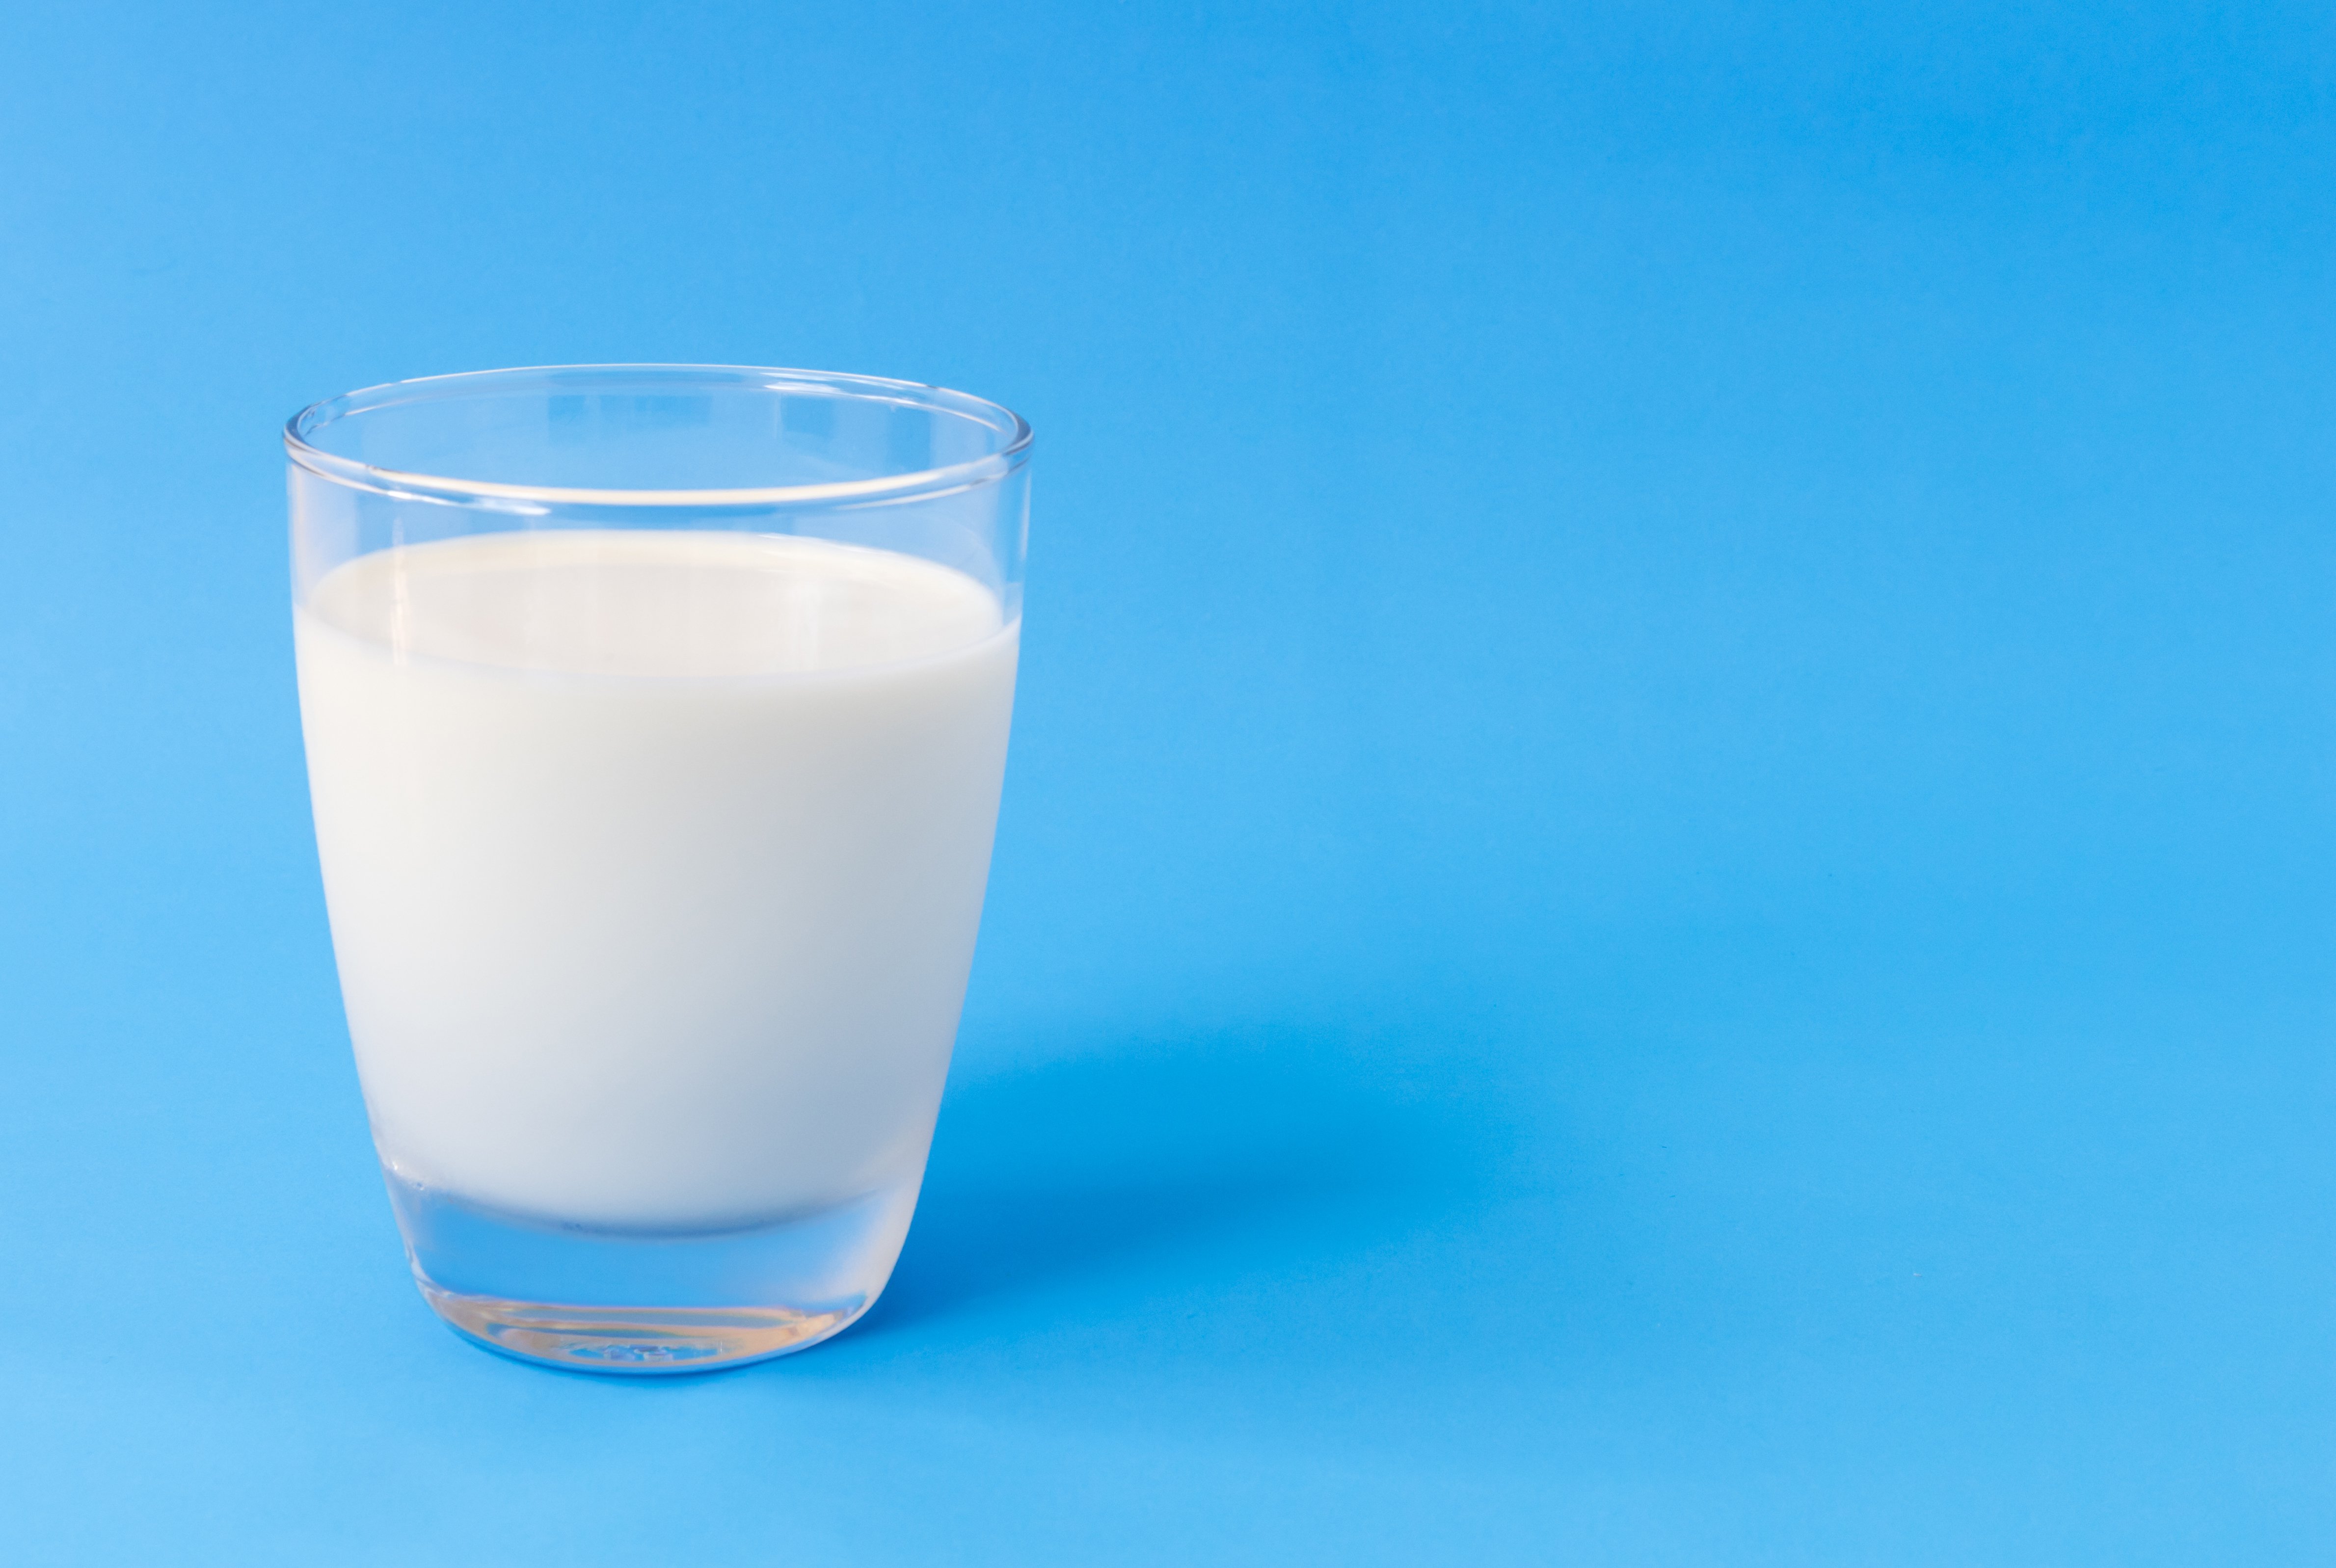 Soy Milk Is the Healthiest Dairy Alternative, Study Says | Time